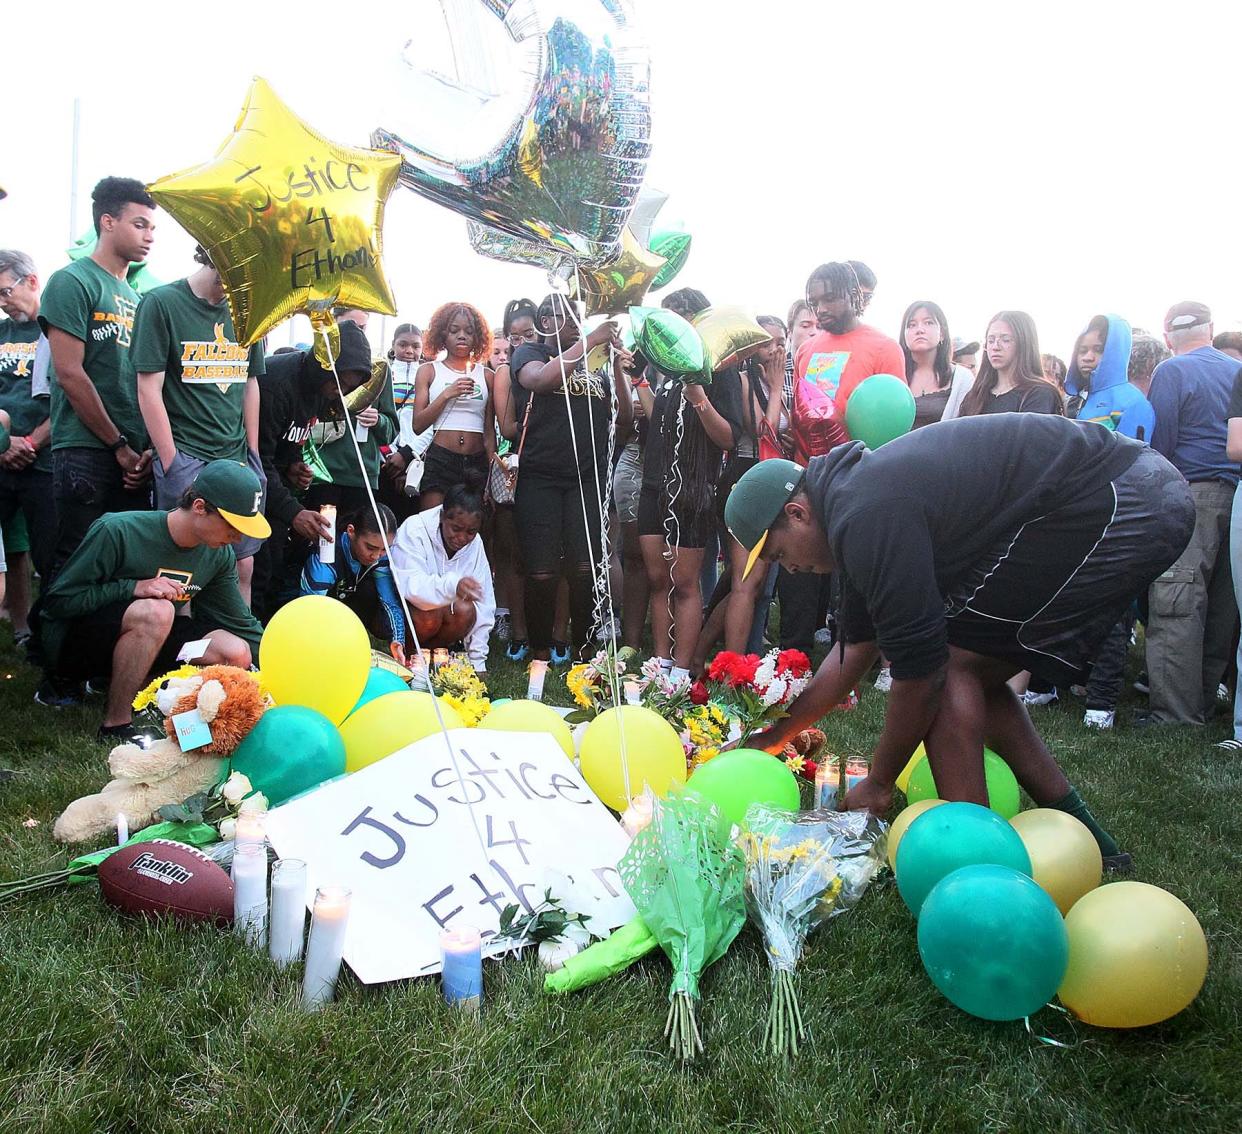 Family and friends gather at the baseball field on Friday evening at Firestone High School in Akron for a vigil for Ethan Liming, 17, a much loved and admired Firestone student who played baseball and football. Liming was killed in an altercation near the basketball courts at the I Promise School on Thursday night.